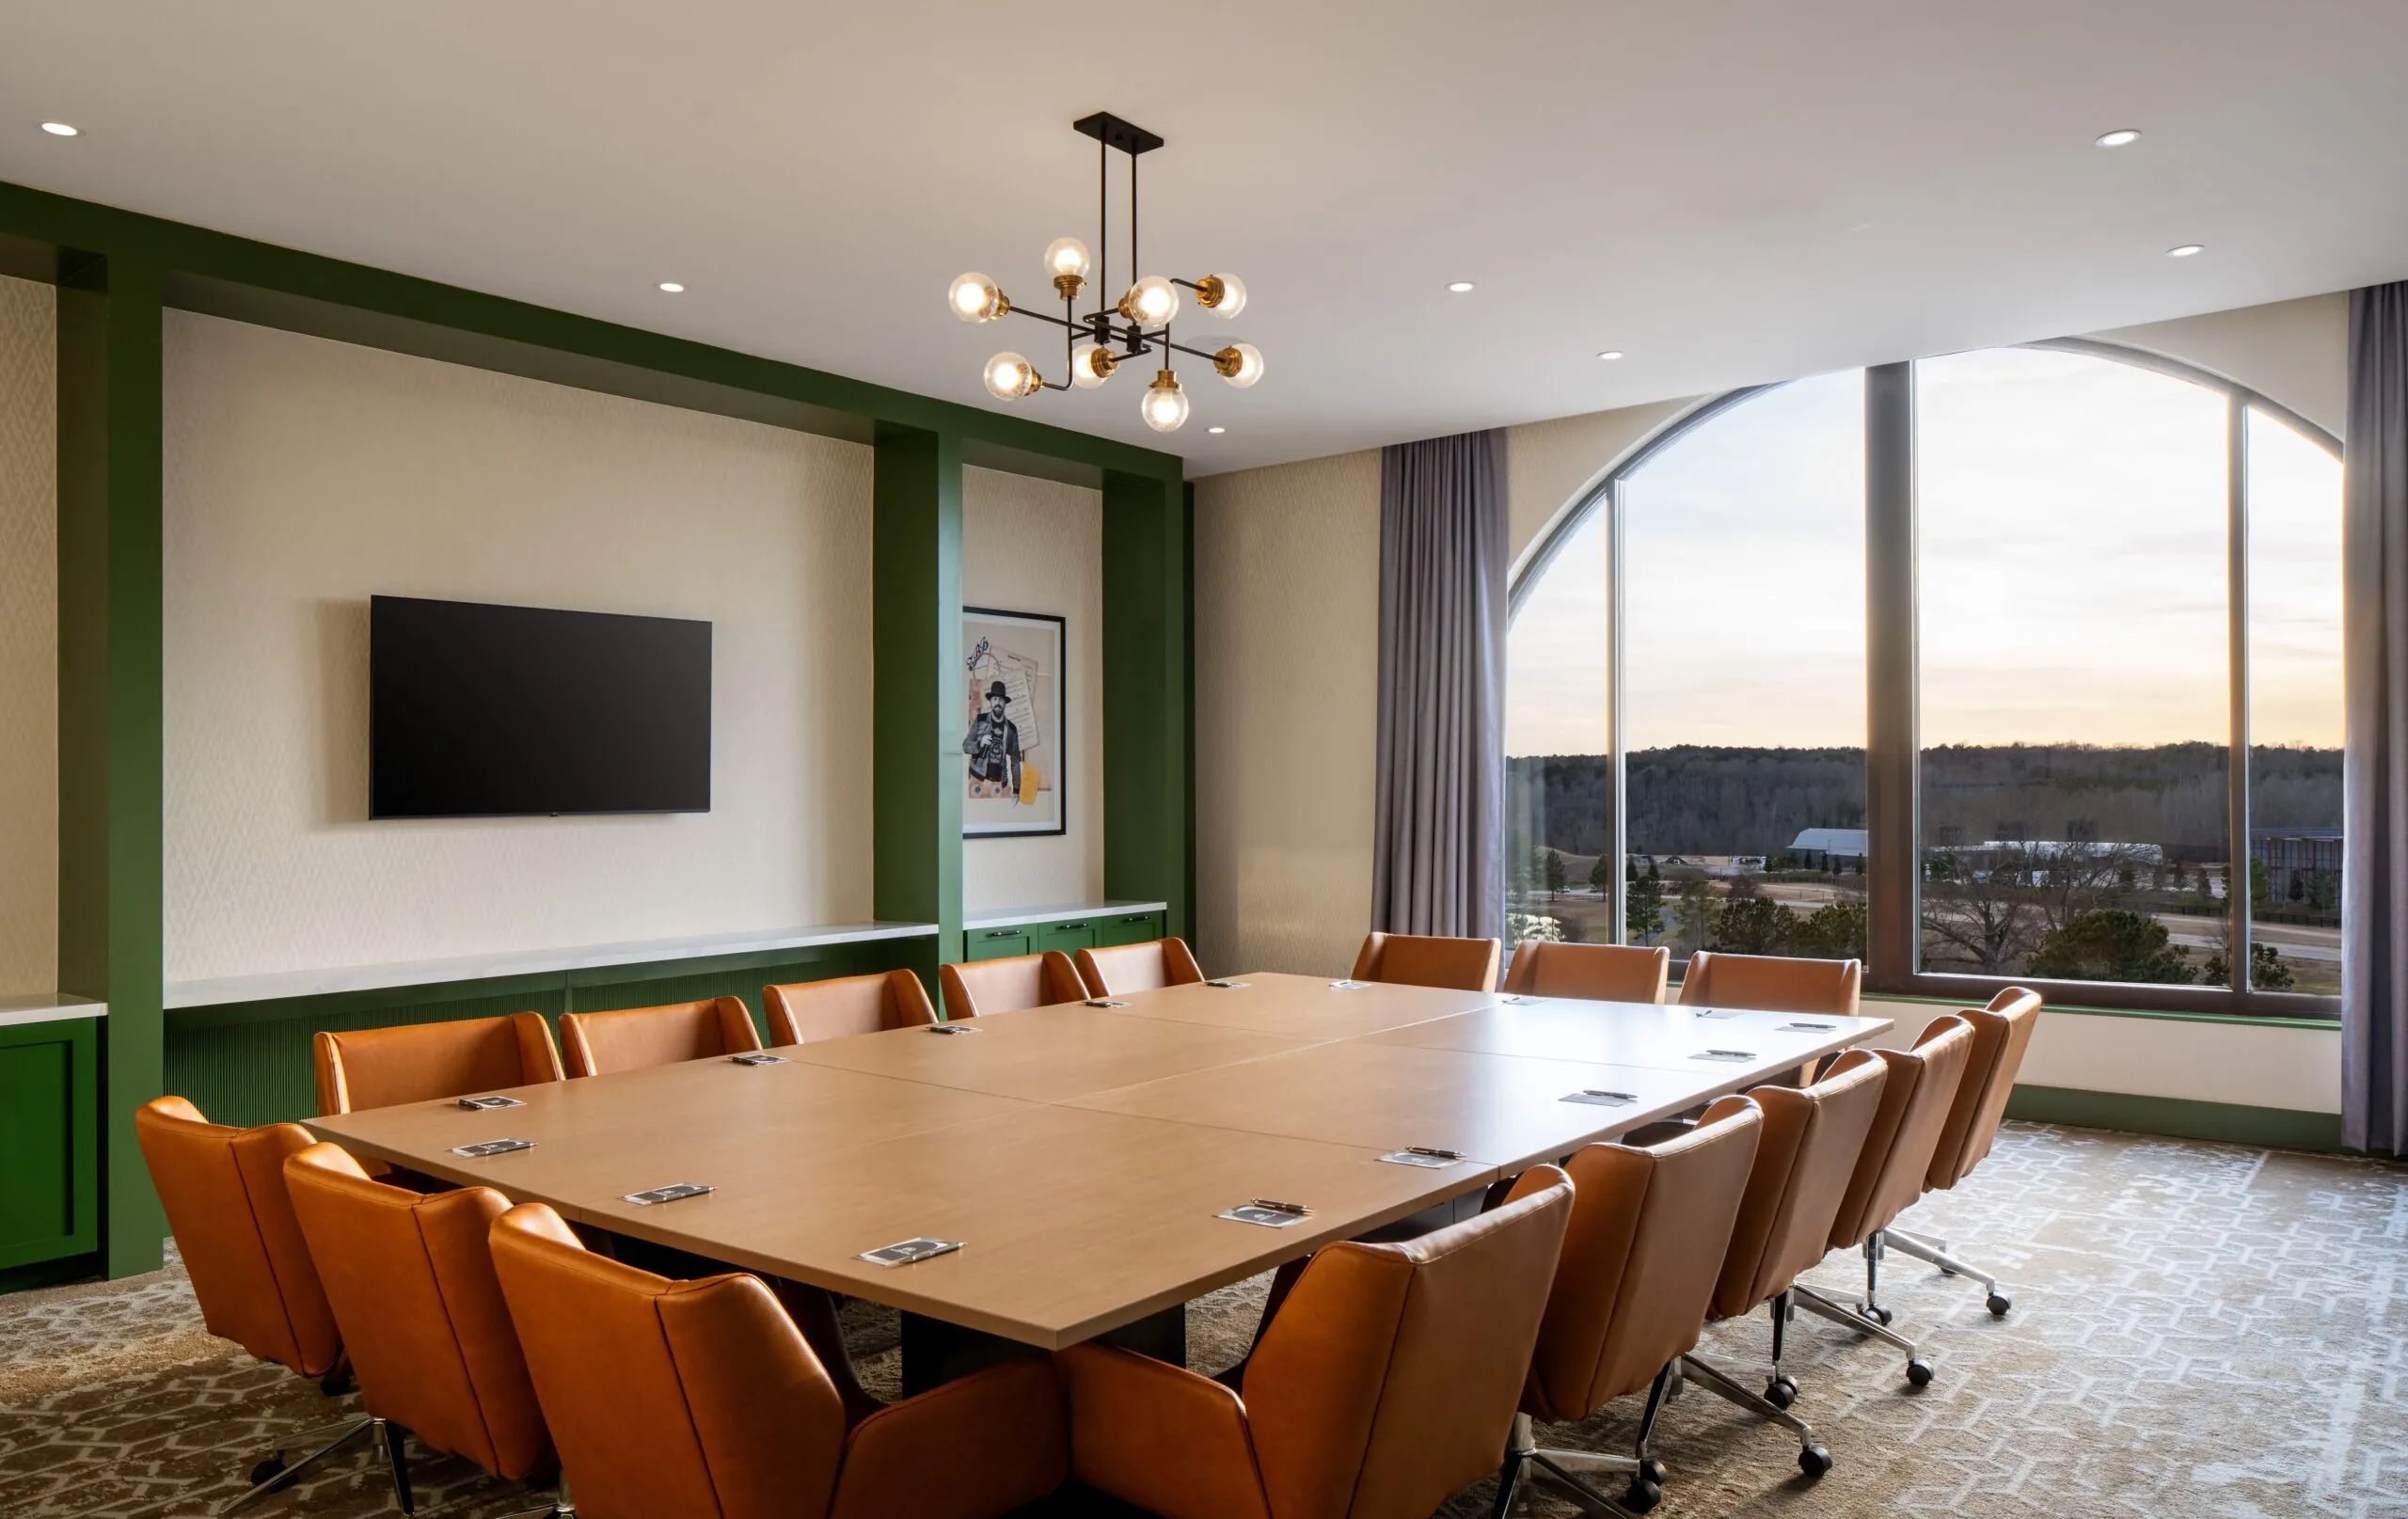 A conference room with a large table and chairs